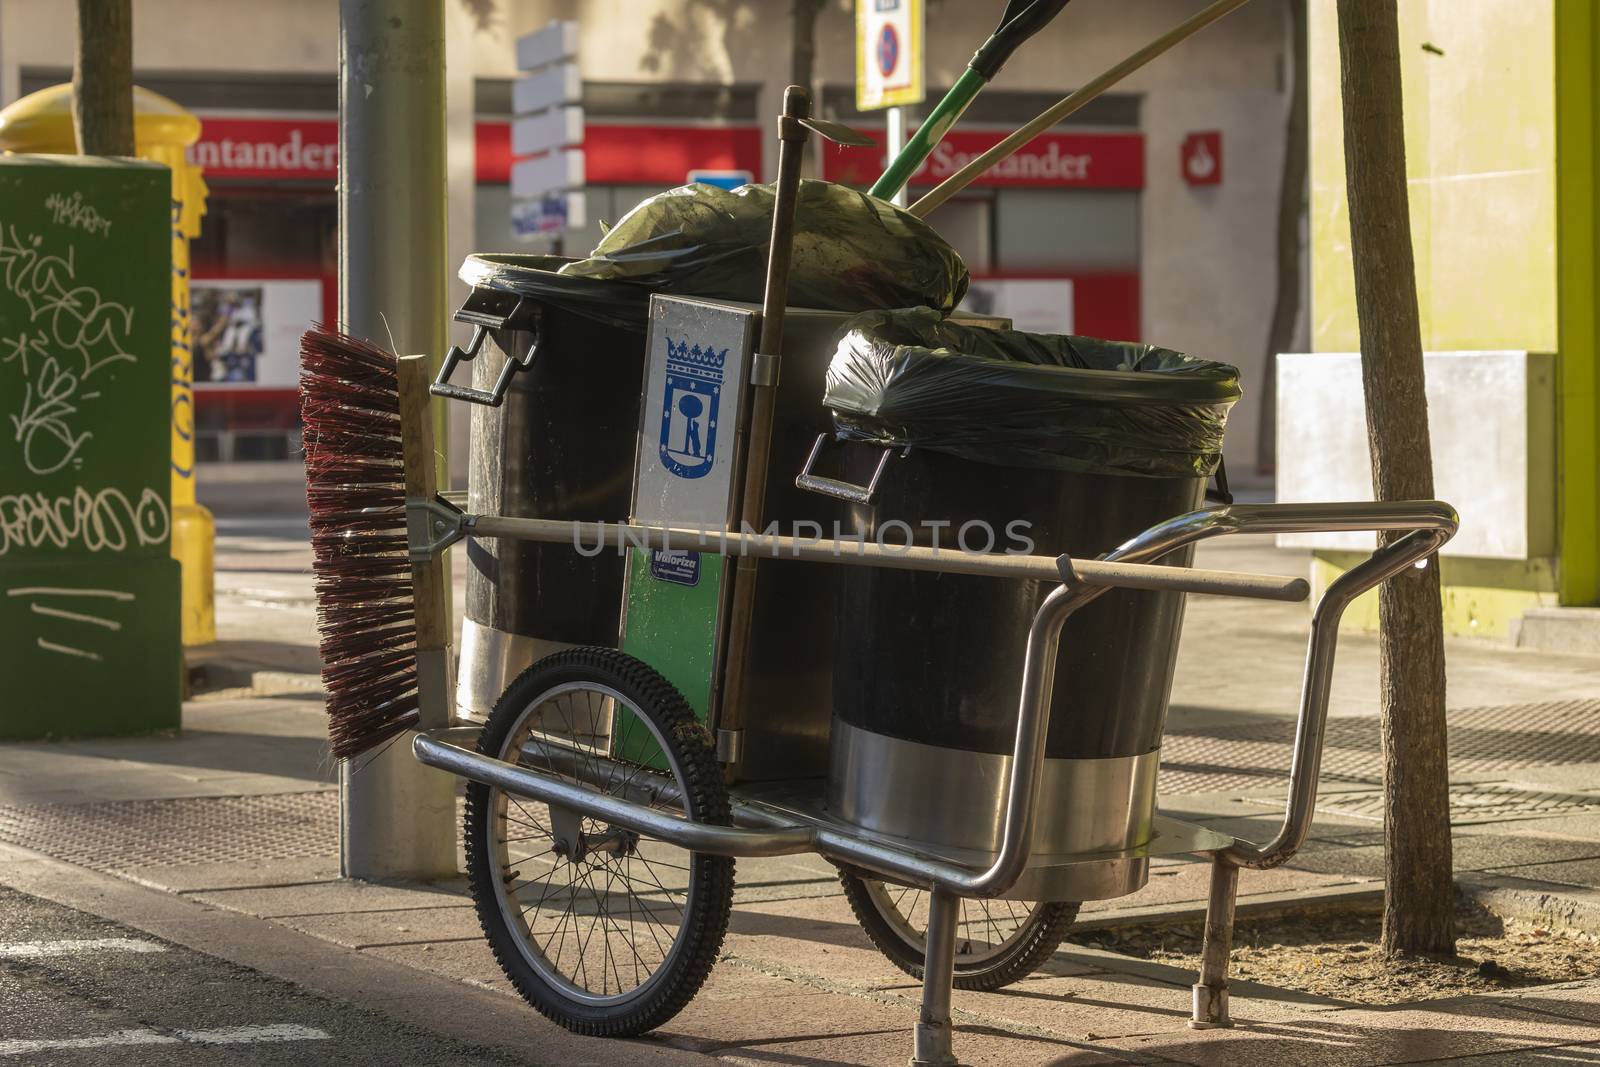 Madrid, Spain - May 19, 2020: Cleaning cart, garbage cans and the working utensils of a worker in her daily cleaning tasks, in the streets of Madrid.